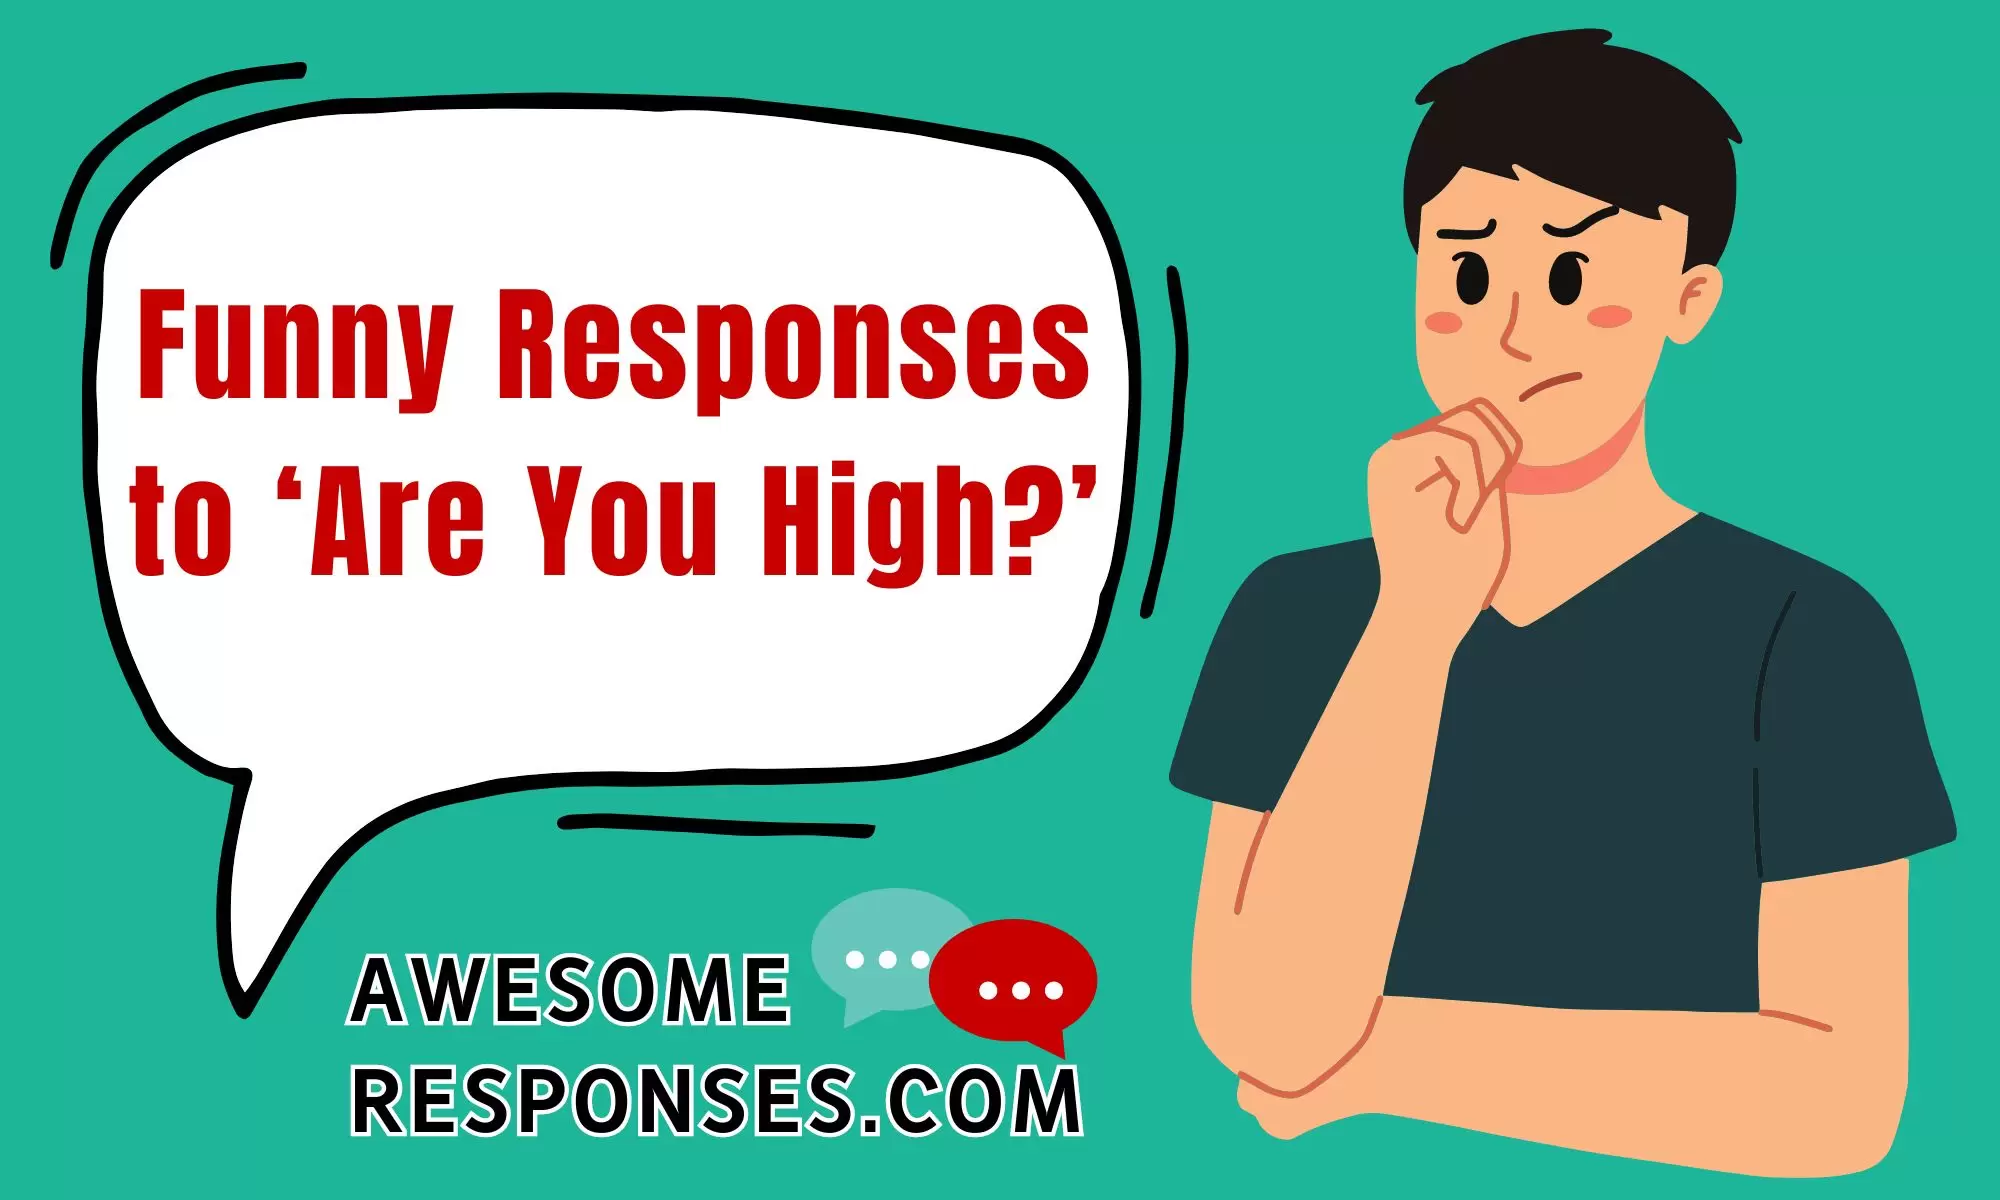 Funny Responses to ‘Are You High?’